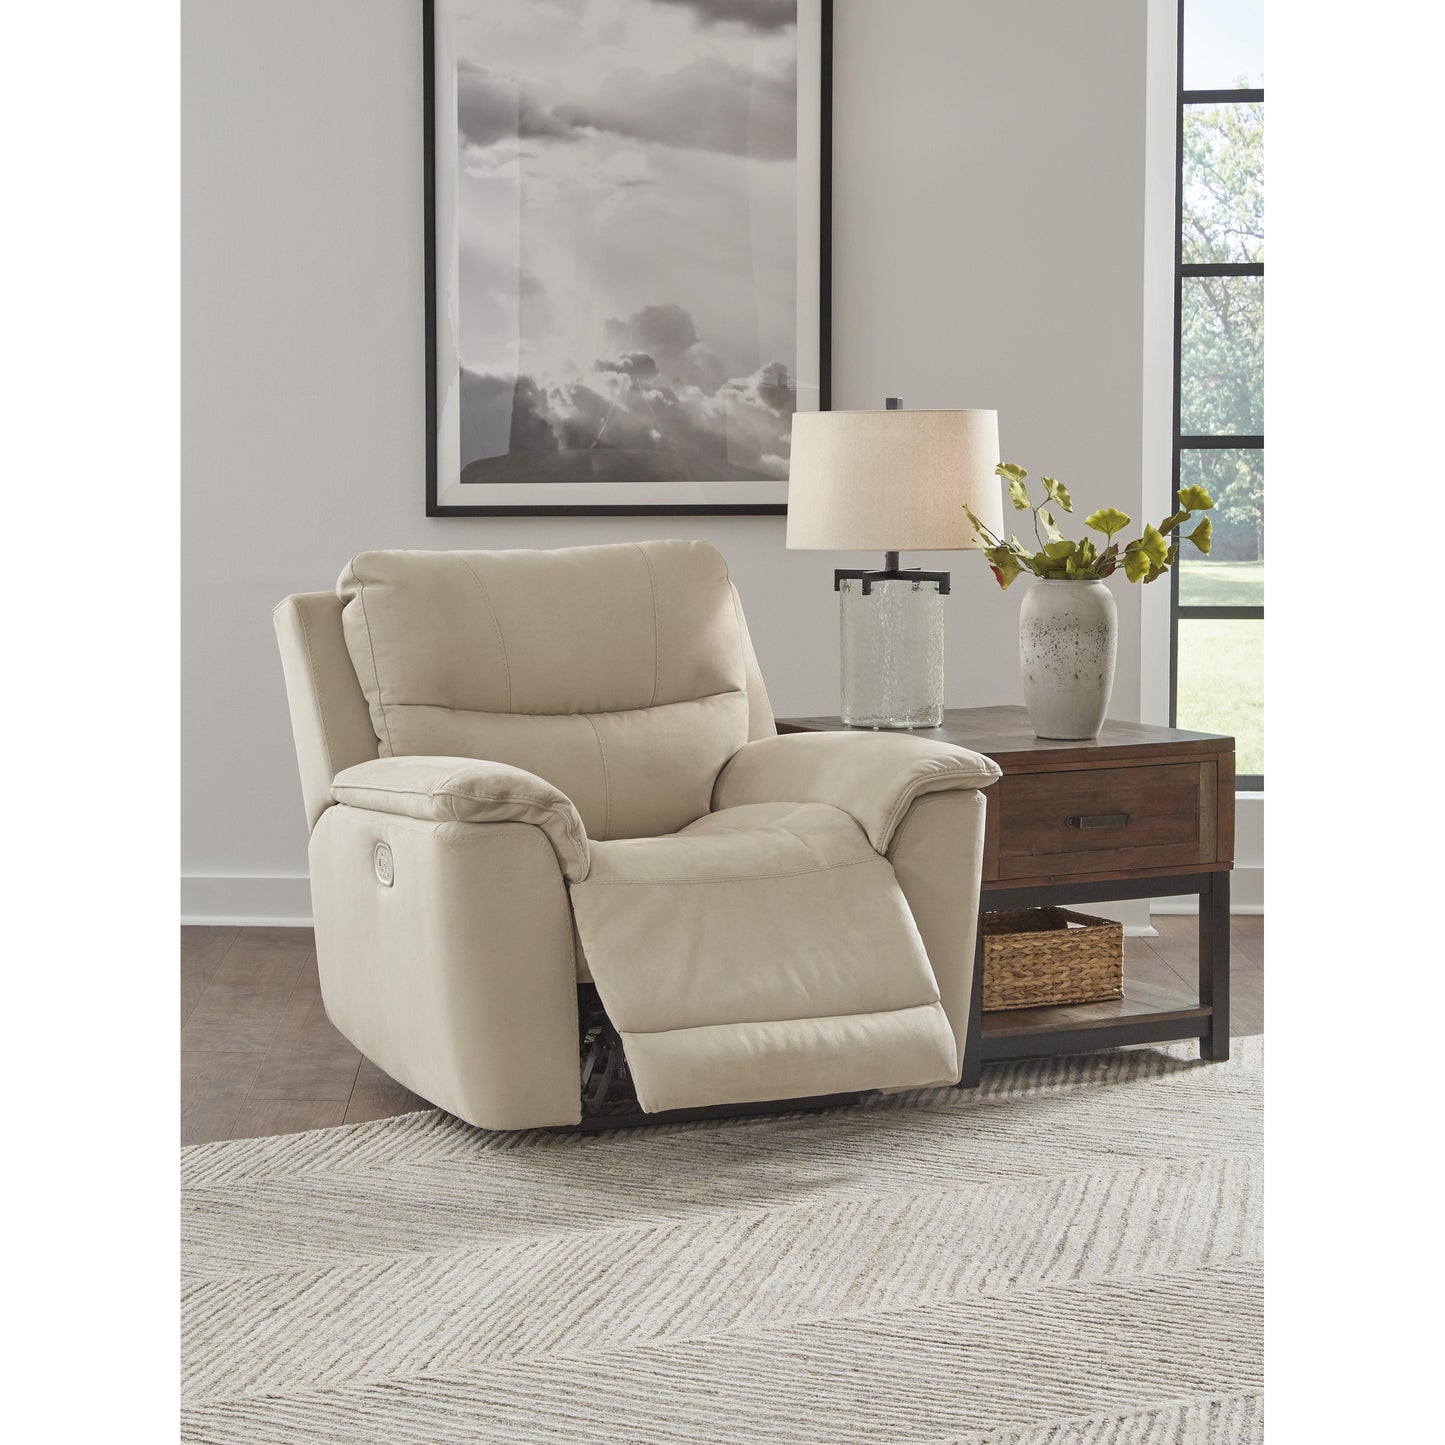 Signature Design by Ashley Next-Gen Gaucho Power Leather Look Recliner 6080713 IMAGE 6